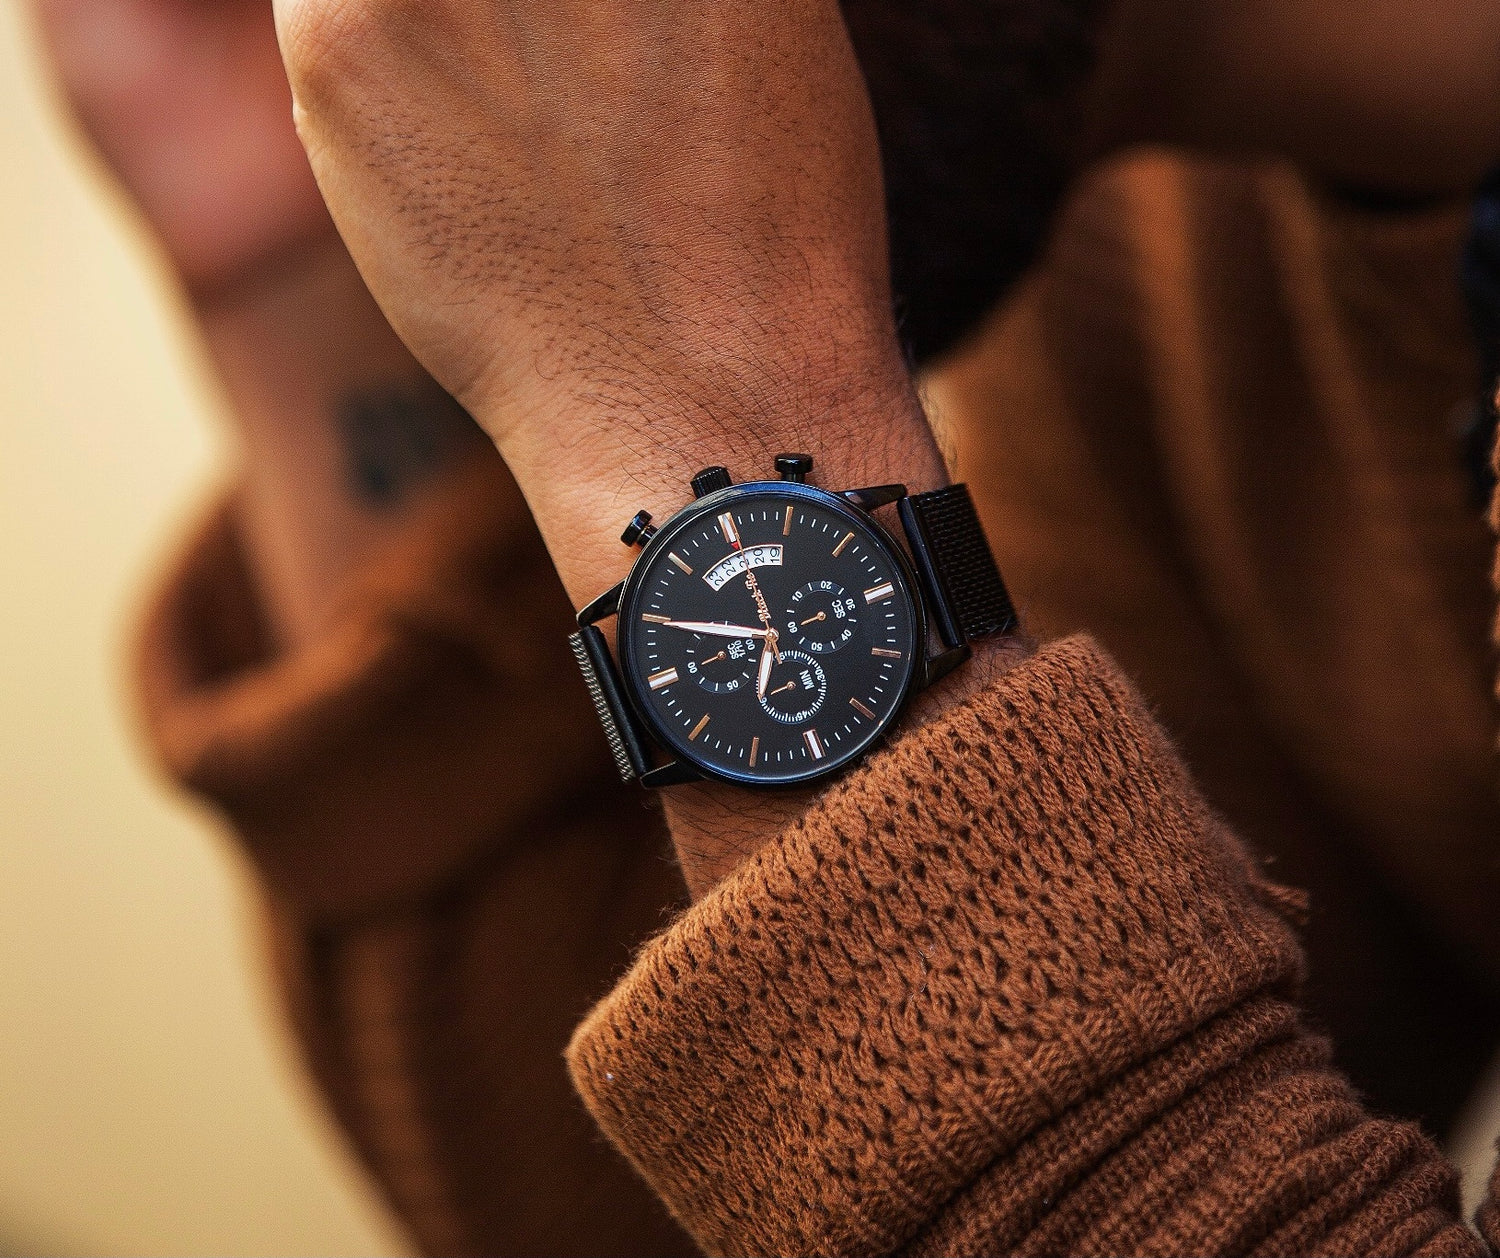 What are the best Watches Under $100?